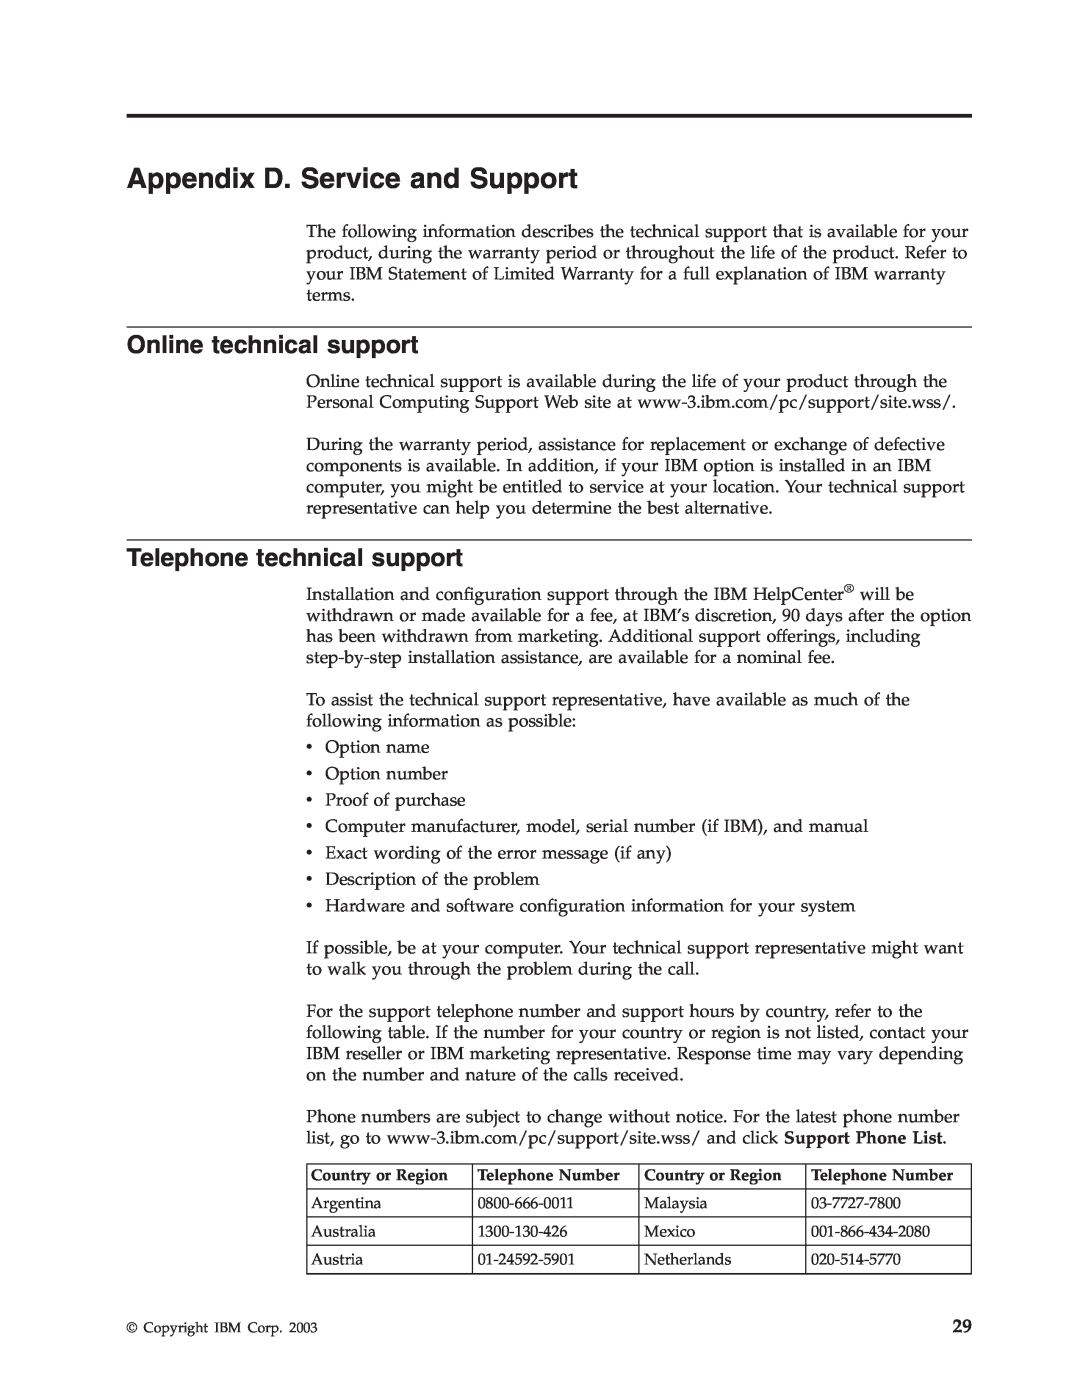 Trust Computer Products IBM 802.11a/b/g Wireless CardBus Adapter Appendix D. Service and Support, Online technical support 